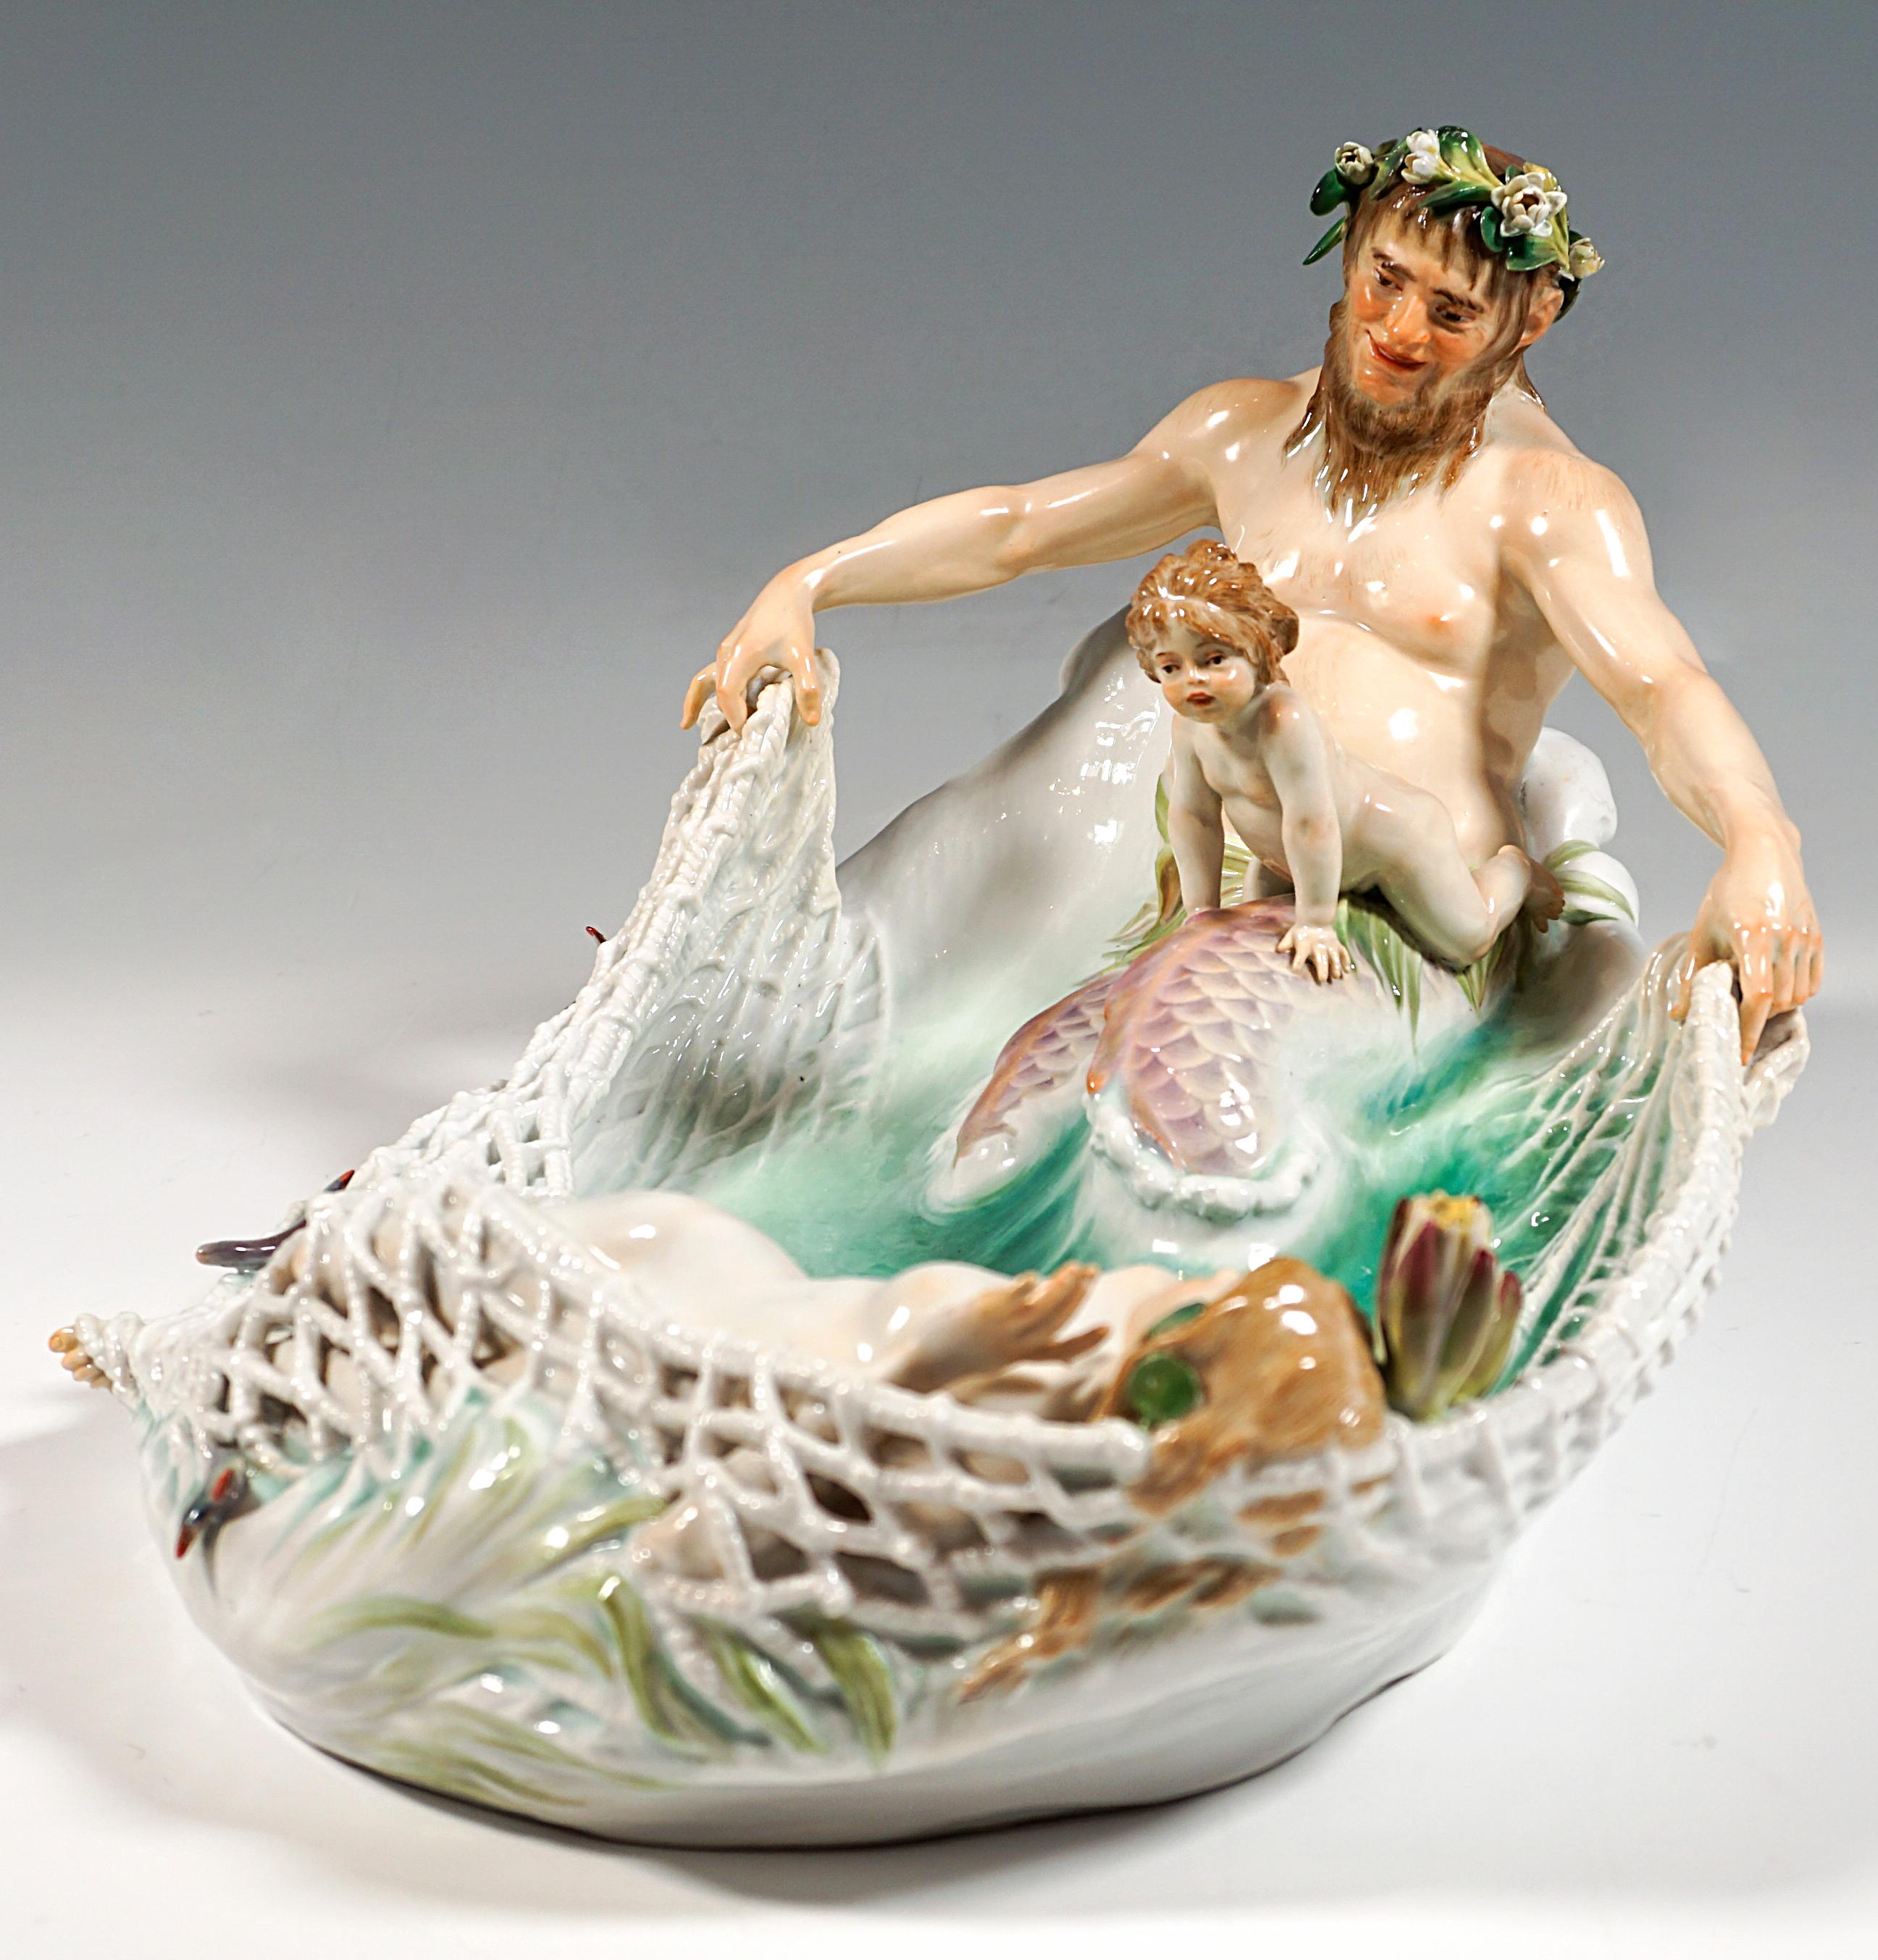 Early 20th Century Art Nouveau Group 'Capture Of A Nymph', by Paul Helmig, Meissen Germany, Ca 1902